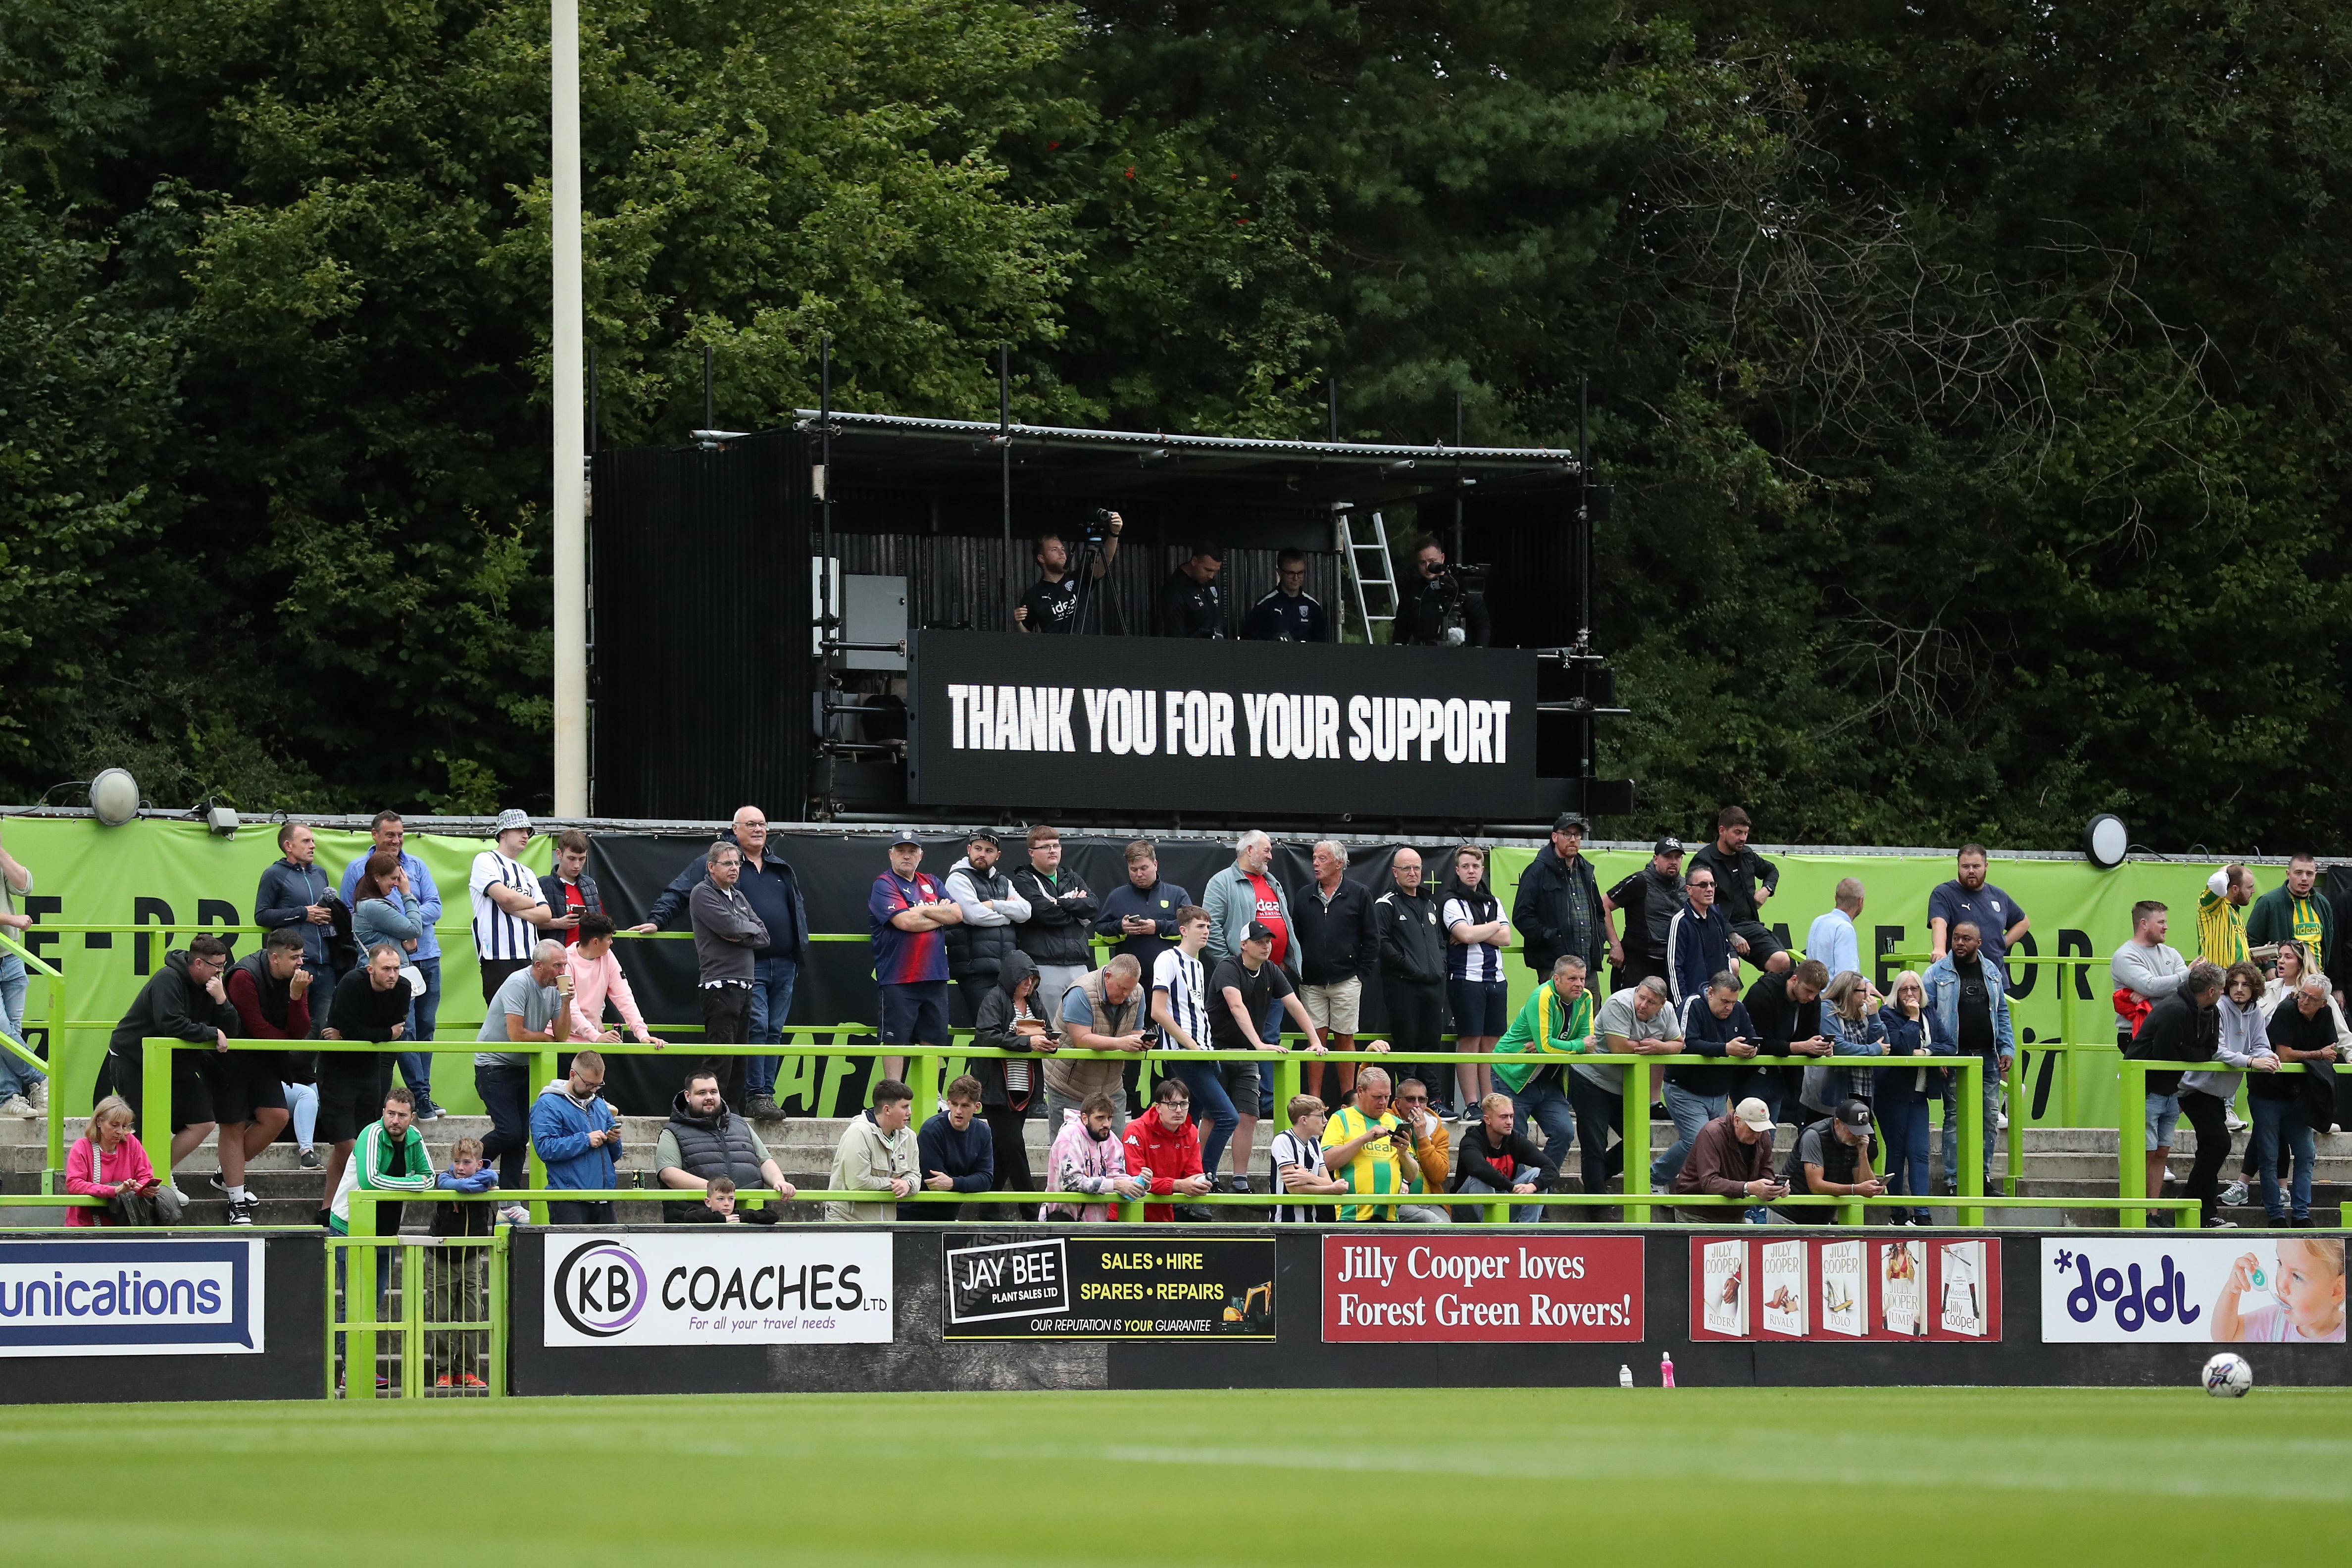 Forest Green Rovers 11